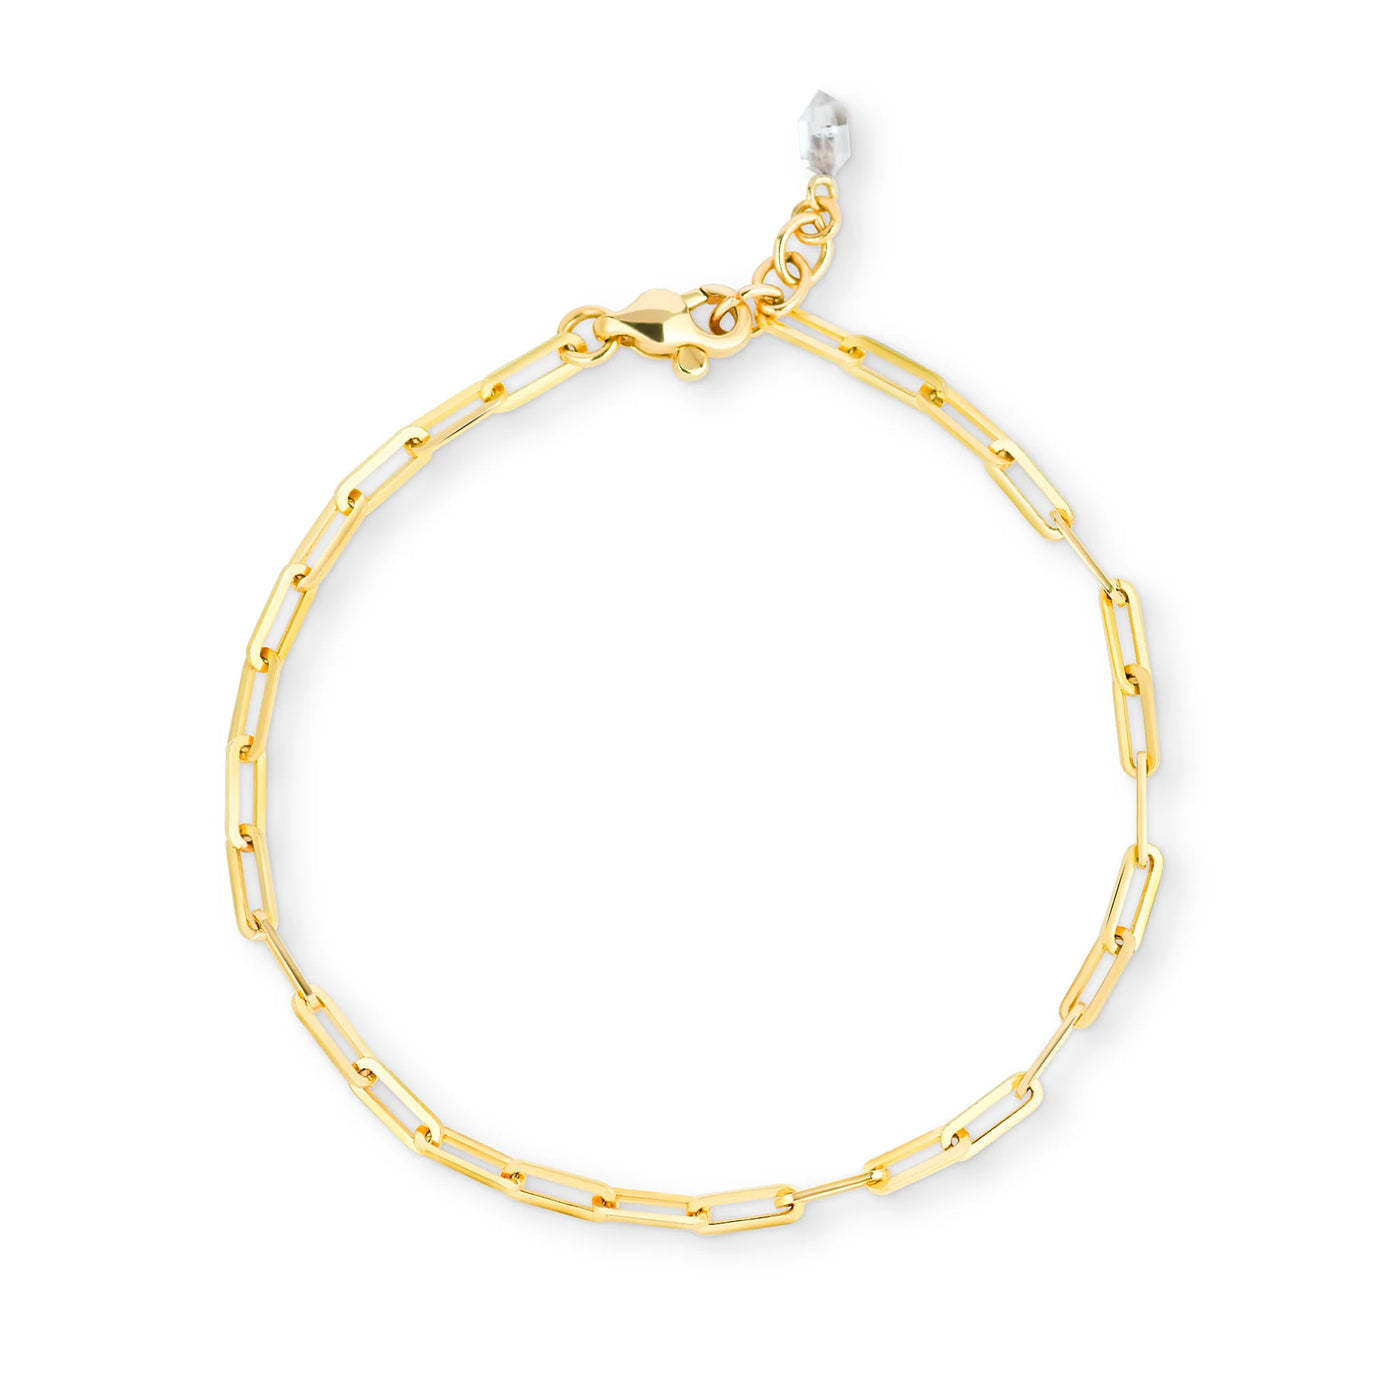 14k yellow gold paperclip chain bracelet long open link adjustabel with crystal accent